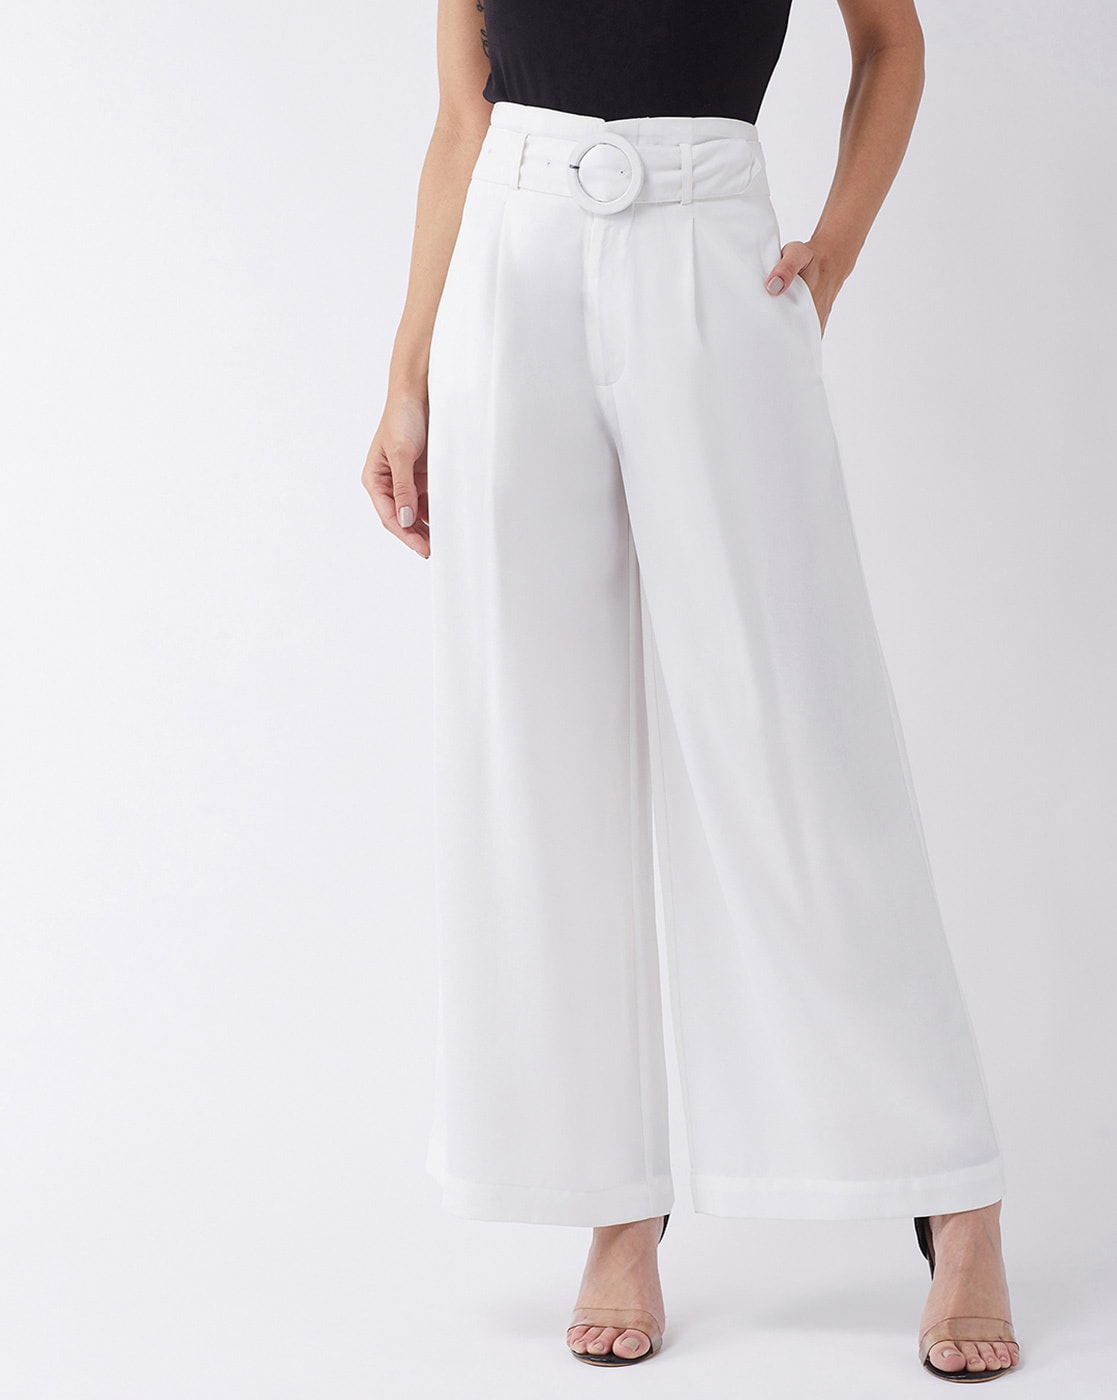 Share more than 119 white high waisted trousers